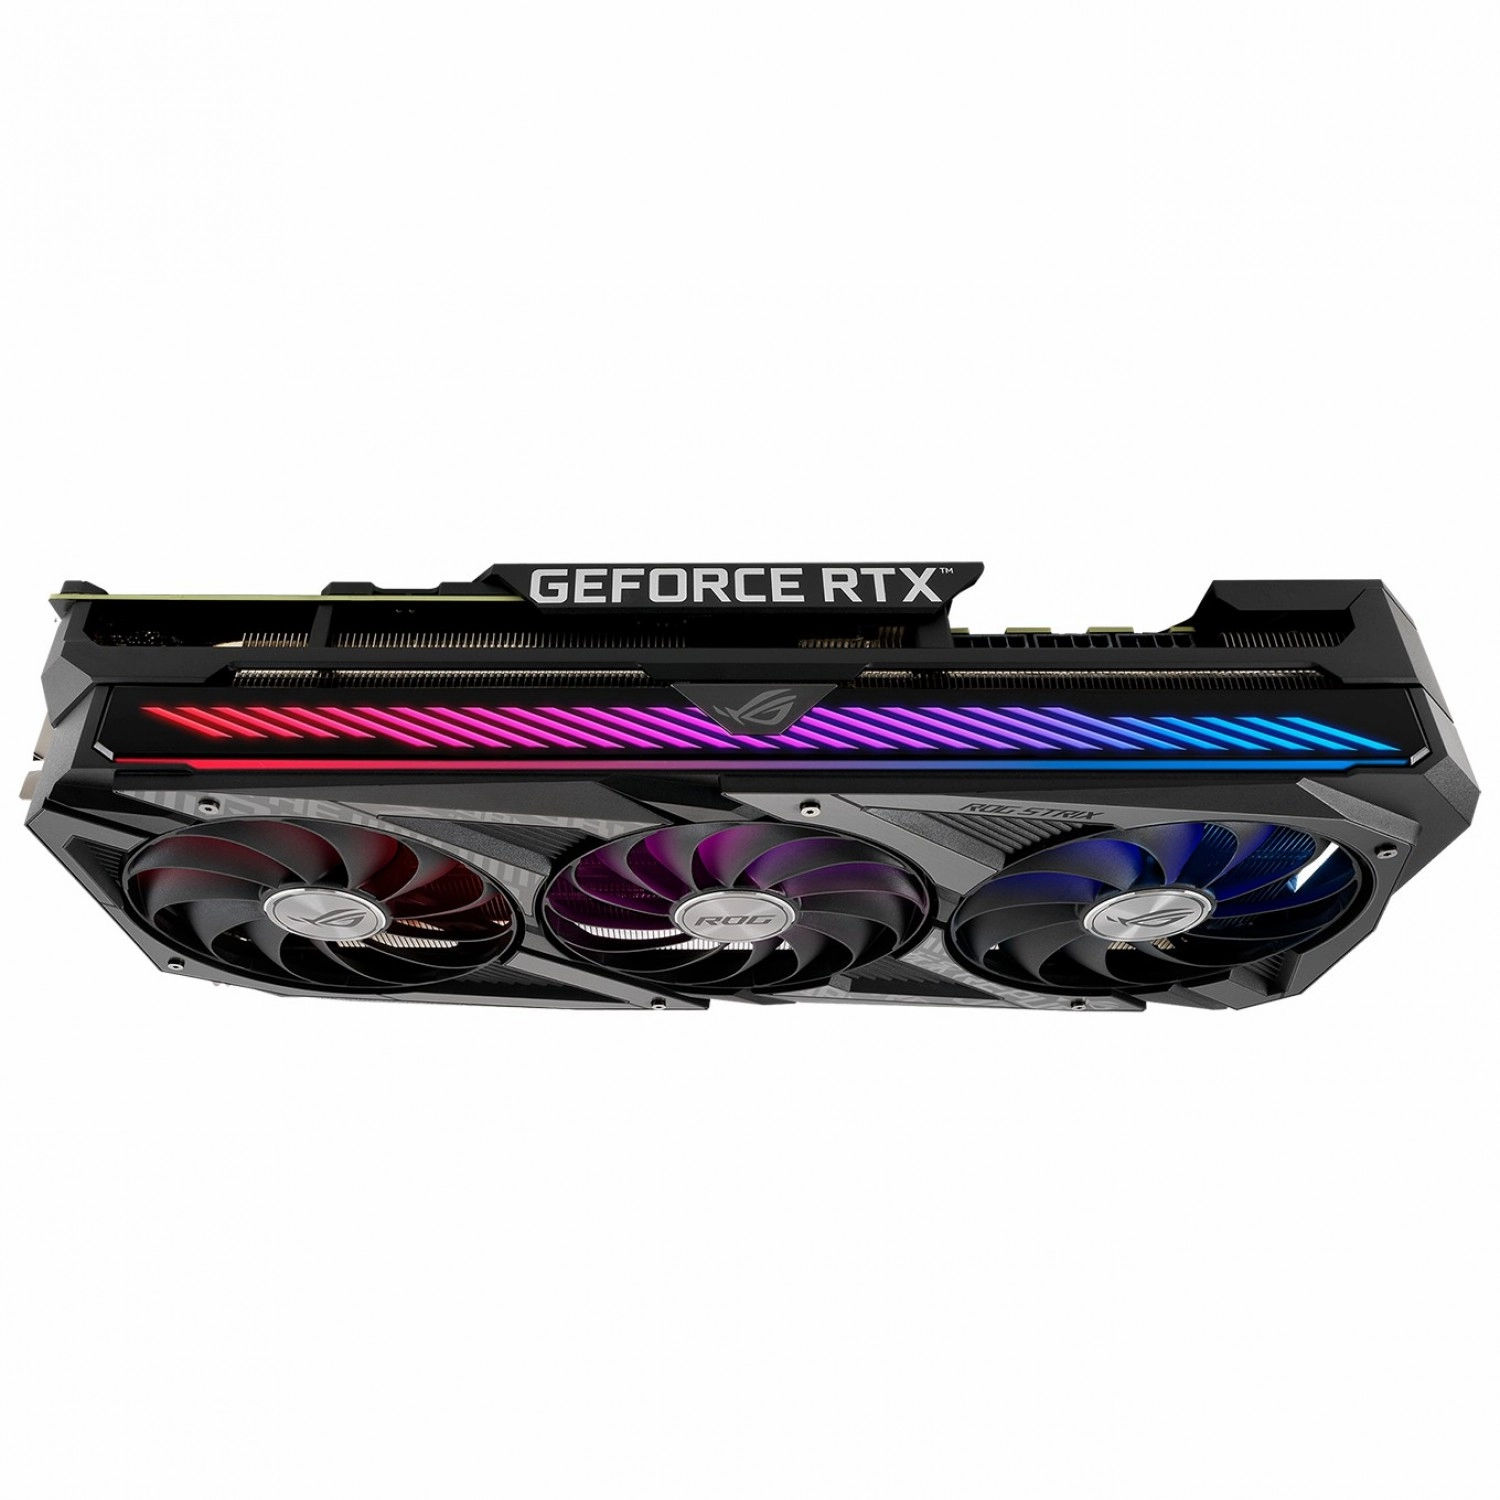 ASUS ROG Strix GeForce RTX 3080 Gaming OC Front View